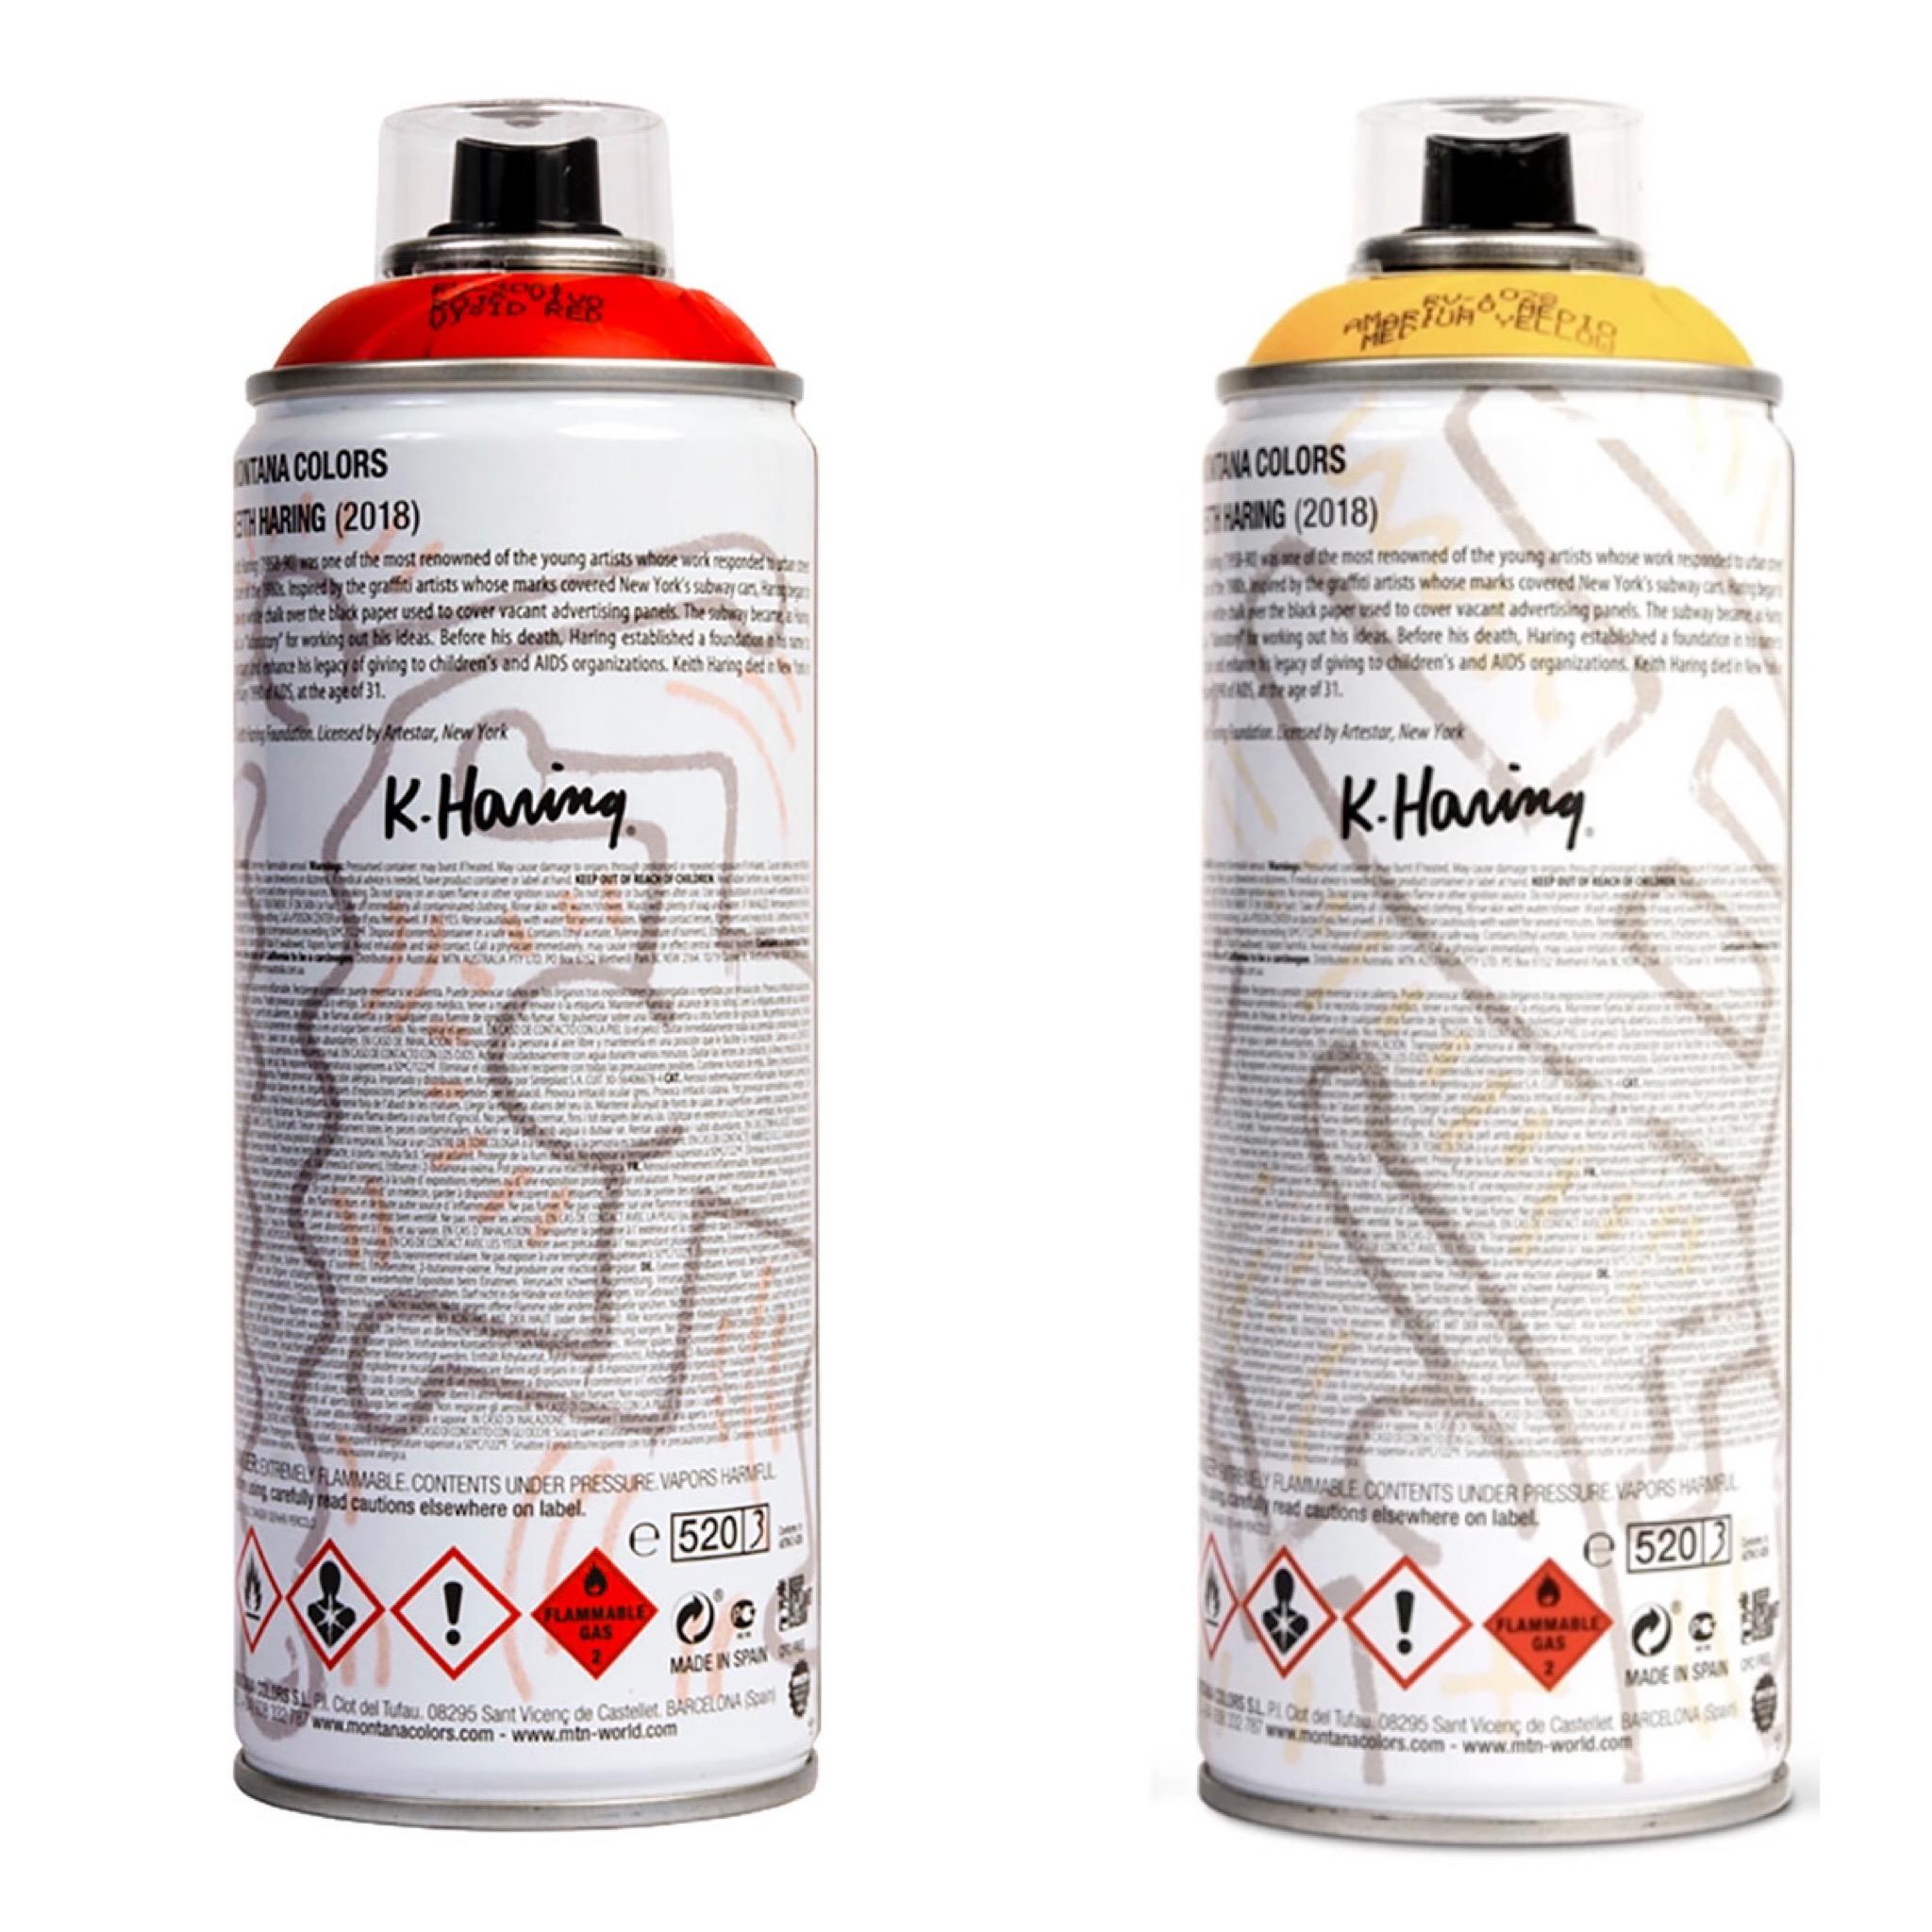 Limited edition Keith Haring spray paint can set 1